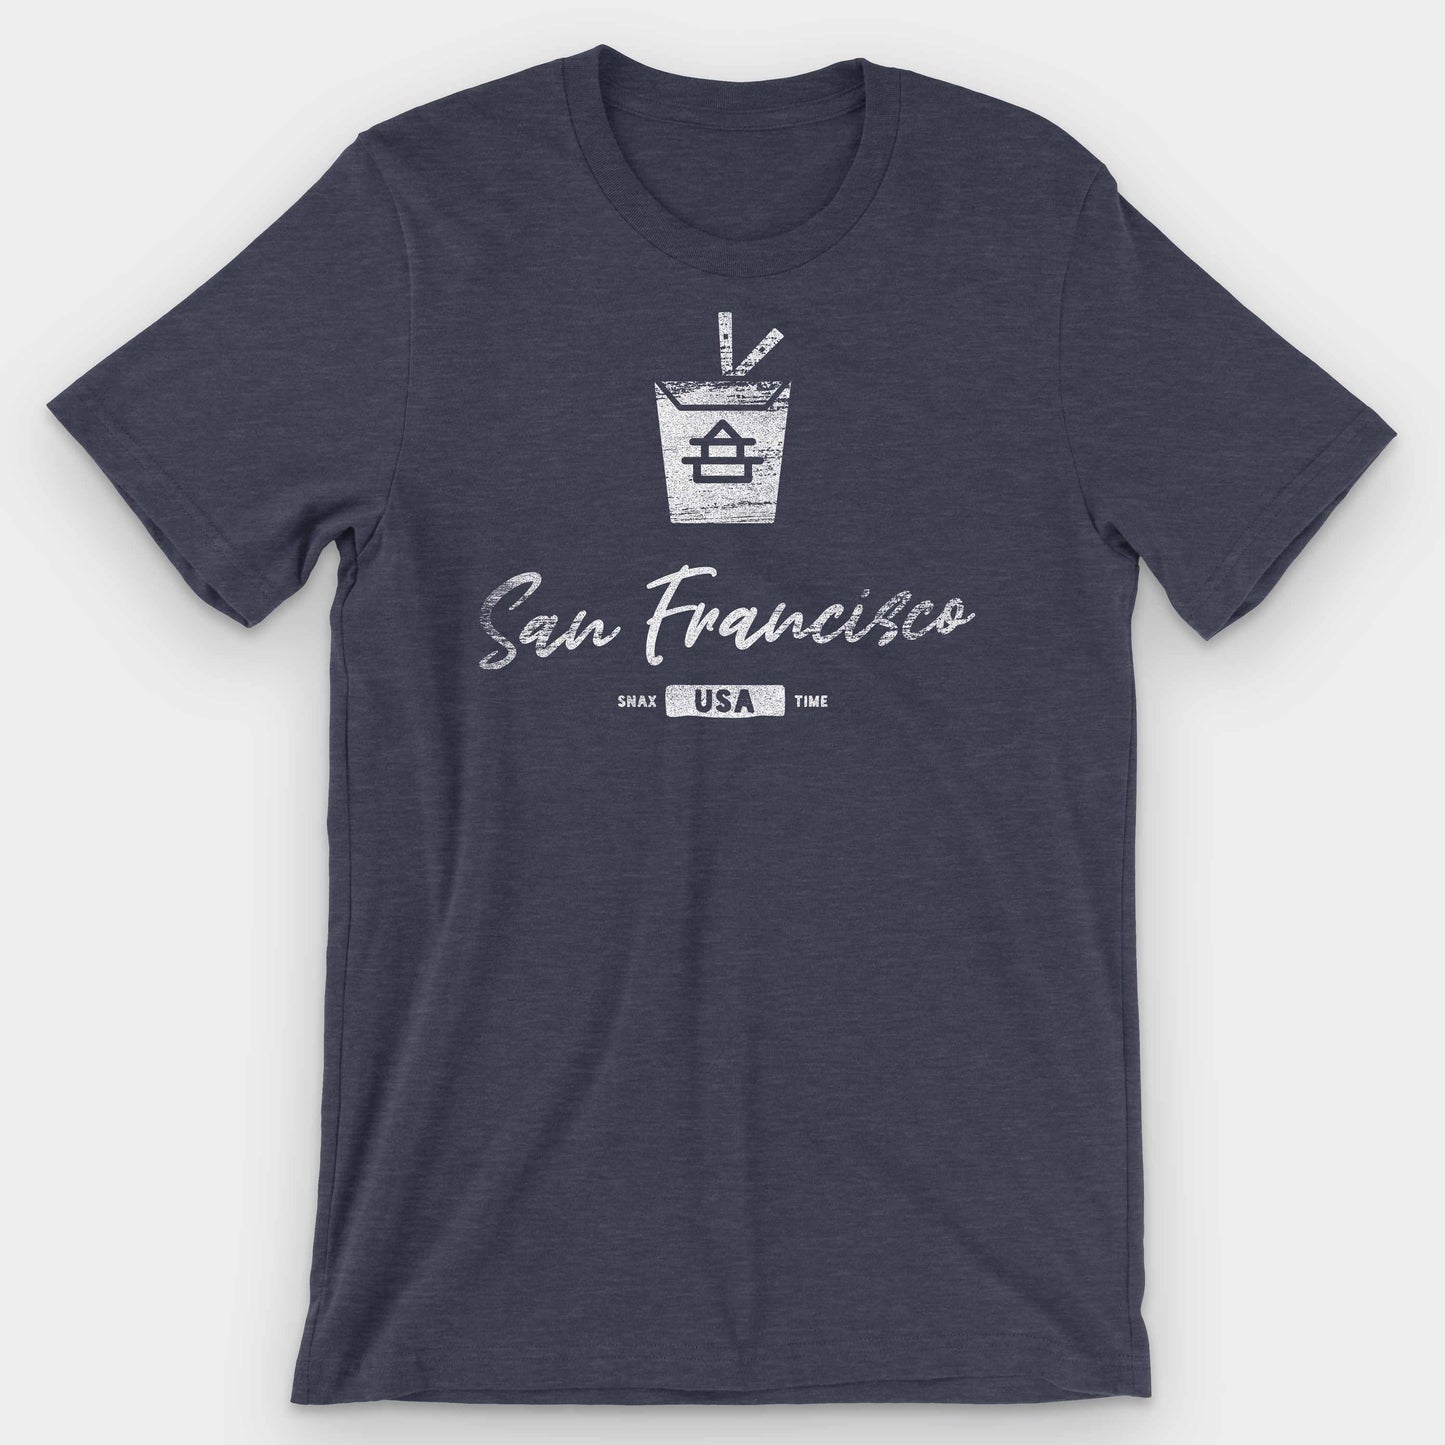 Heather Midnight Navy San Francisco Chinese Takeout Graphic T-Shirt by Snaxtime